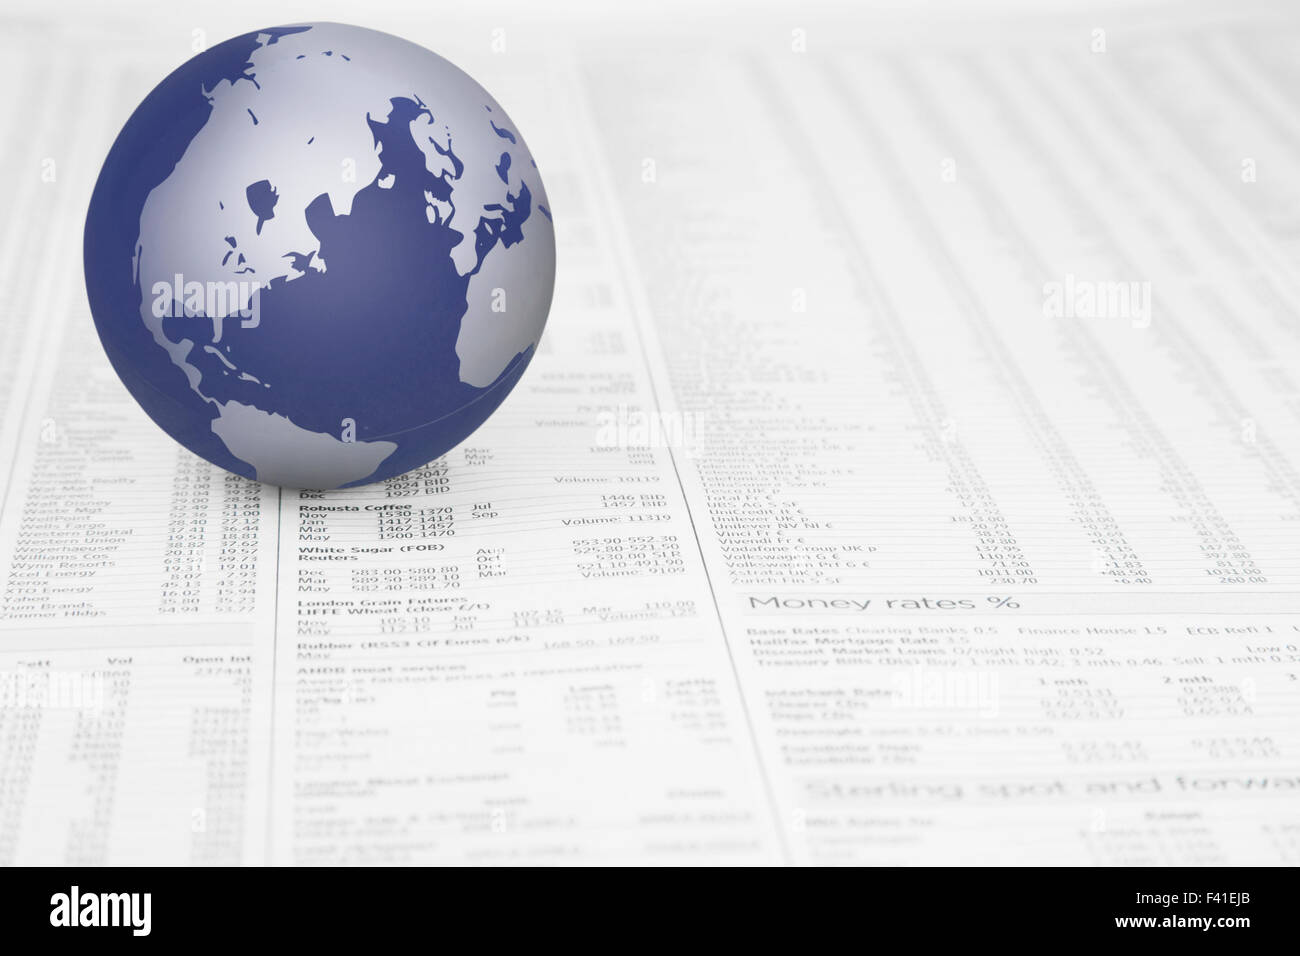 Map of the world globe on a News paper Stock market financial page showing stocks and shares Stock Photo